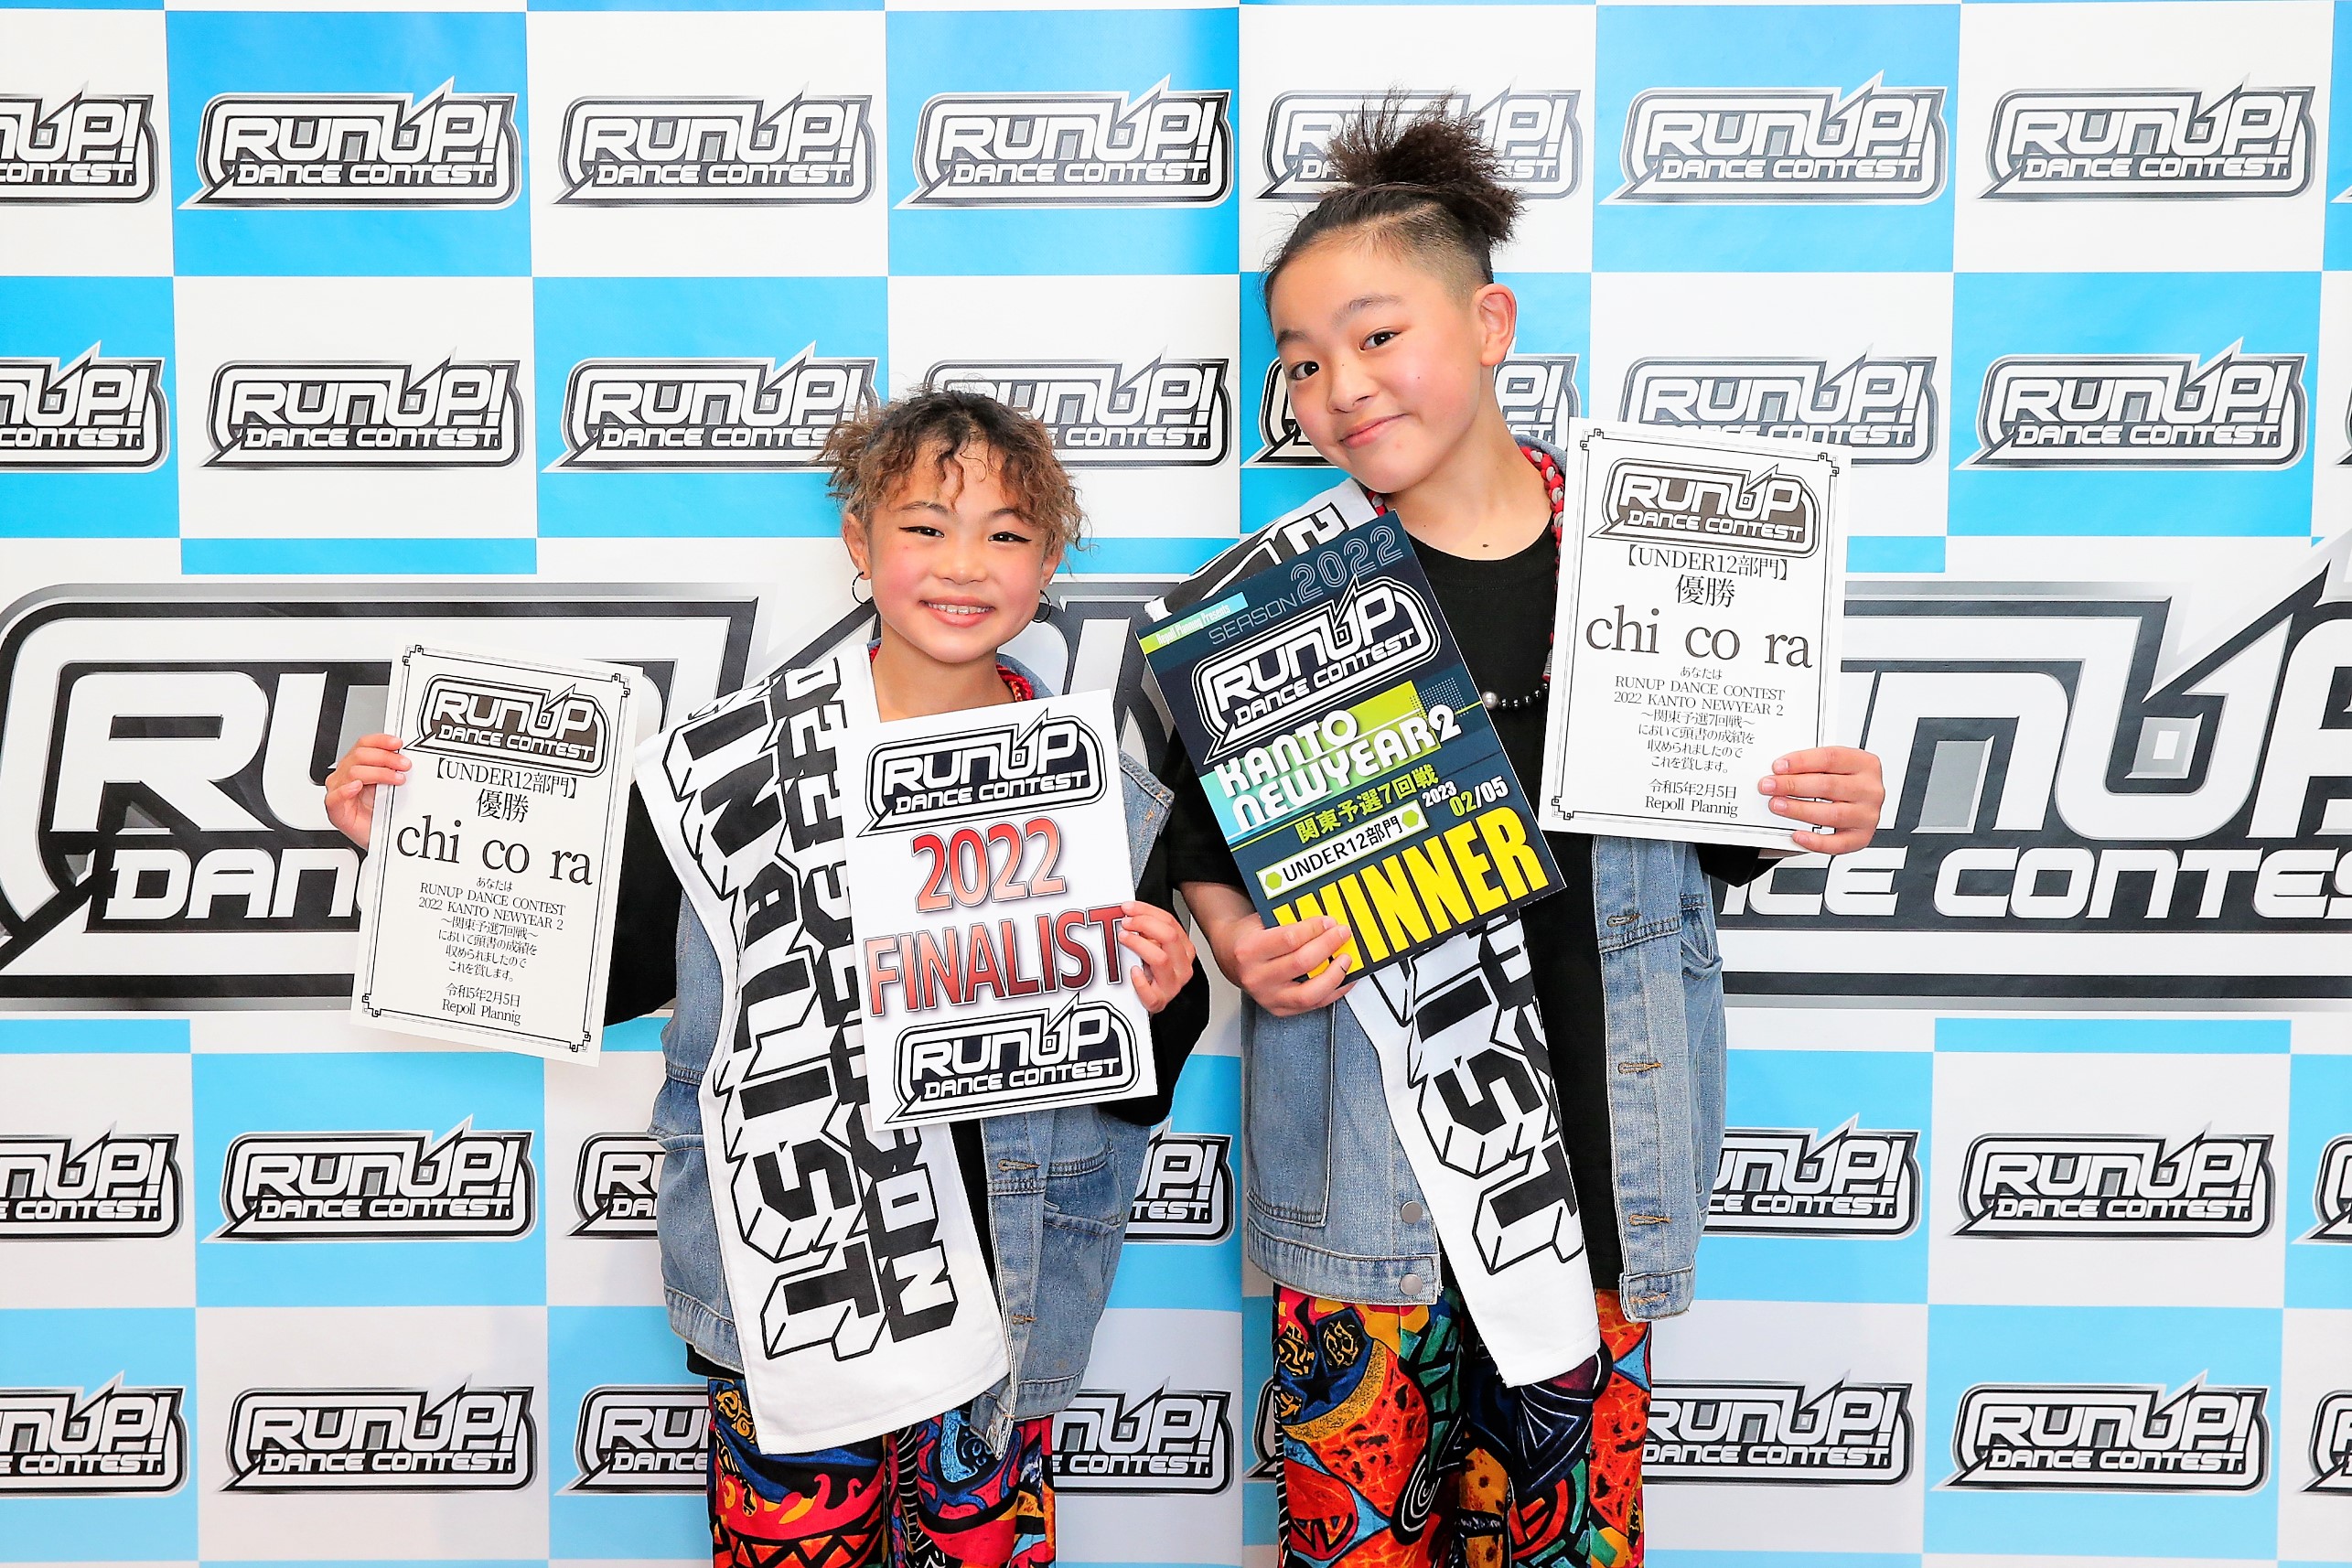 RUNUP 2022 KANTO NEWYEAR2 UNDER12 優勝 chi co ra